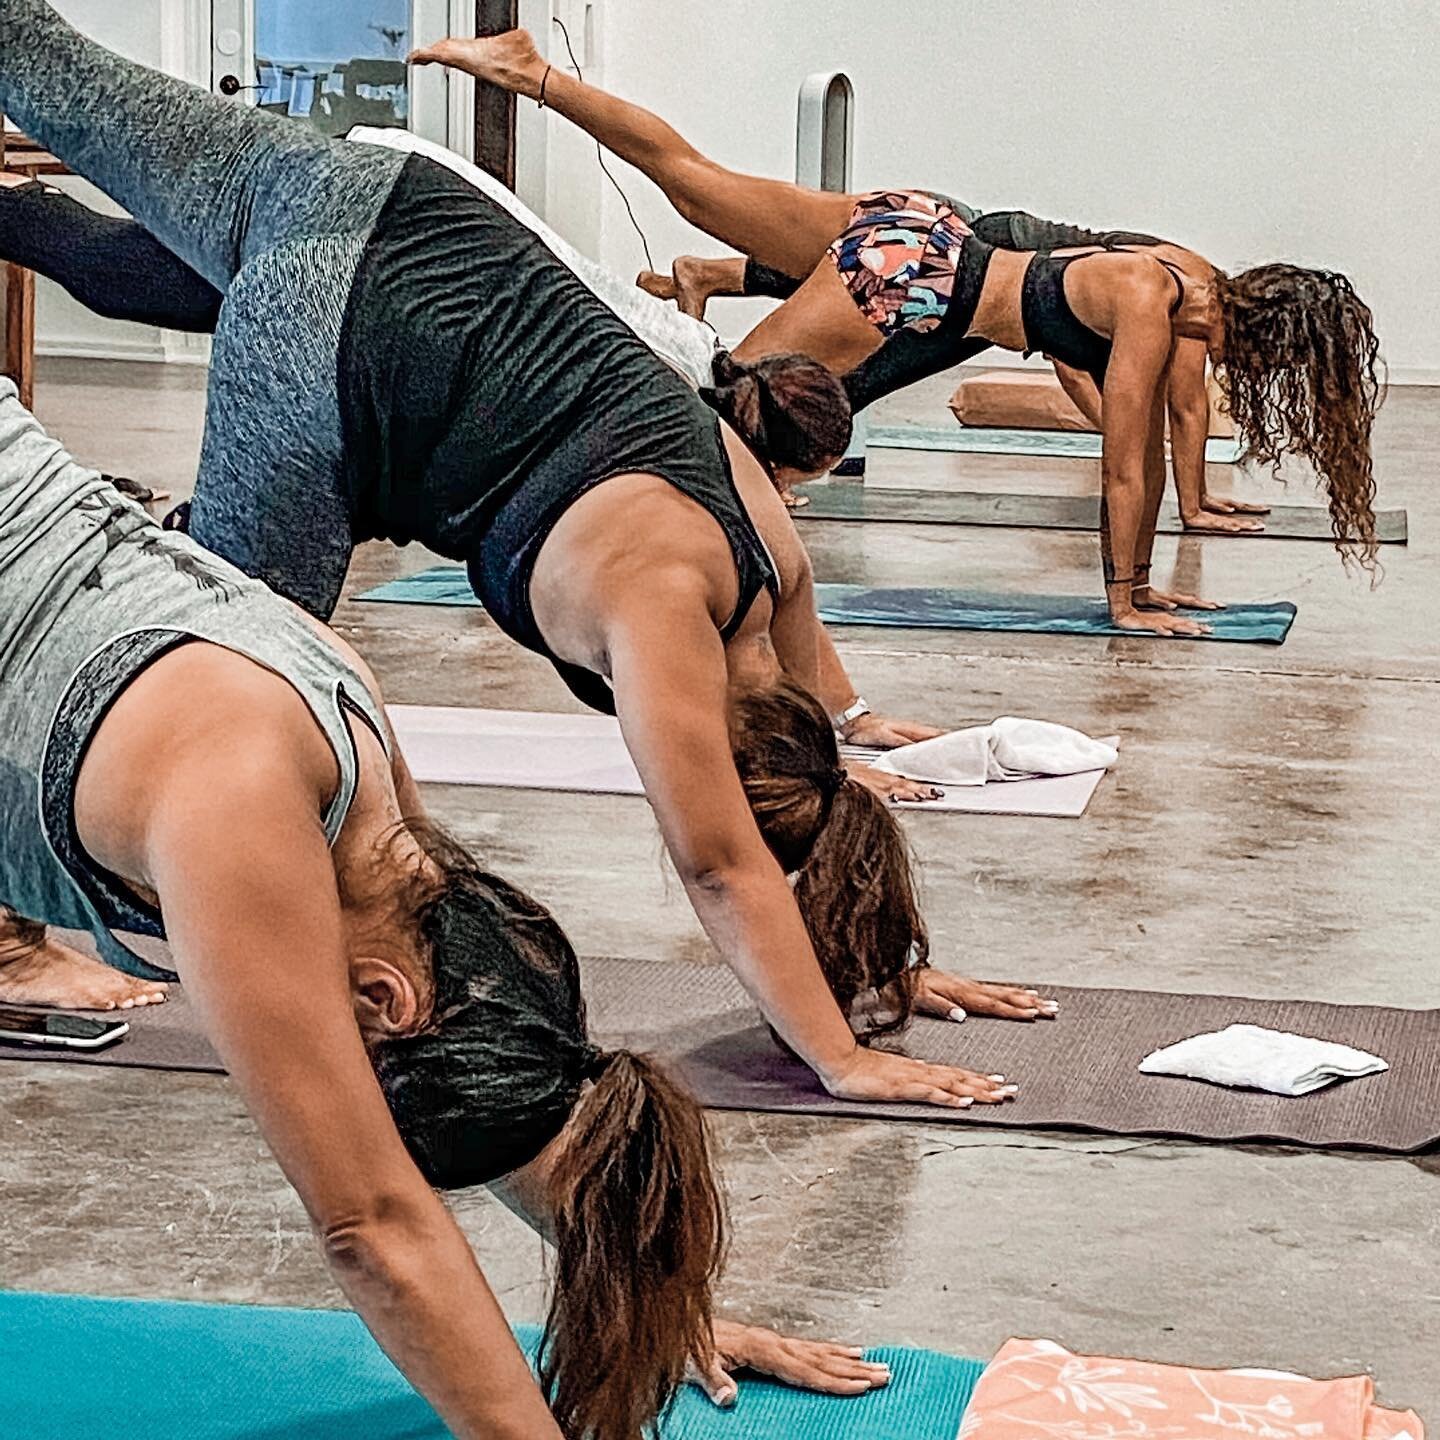 Another beautiful strong Yoga Friday before our long weekend ahead! Thank you @yogini_vallia for a fun &amp; strong class! 💪🏽🧘🏽&zwj;♀️💪🏽

Looking for a fun way to keep your mind and body sound these days! Join us weekly for Yoga! DM us to grab 